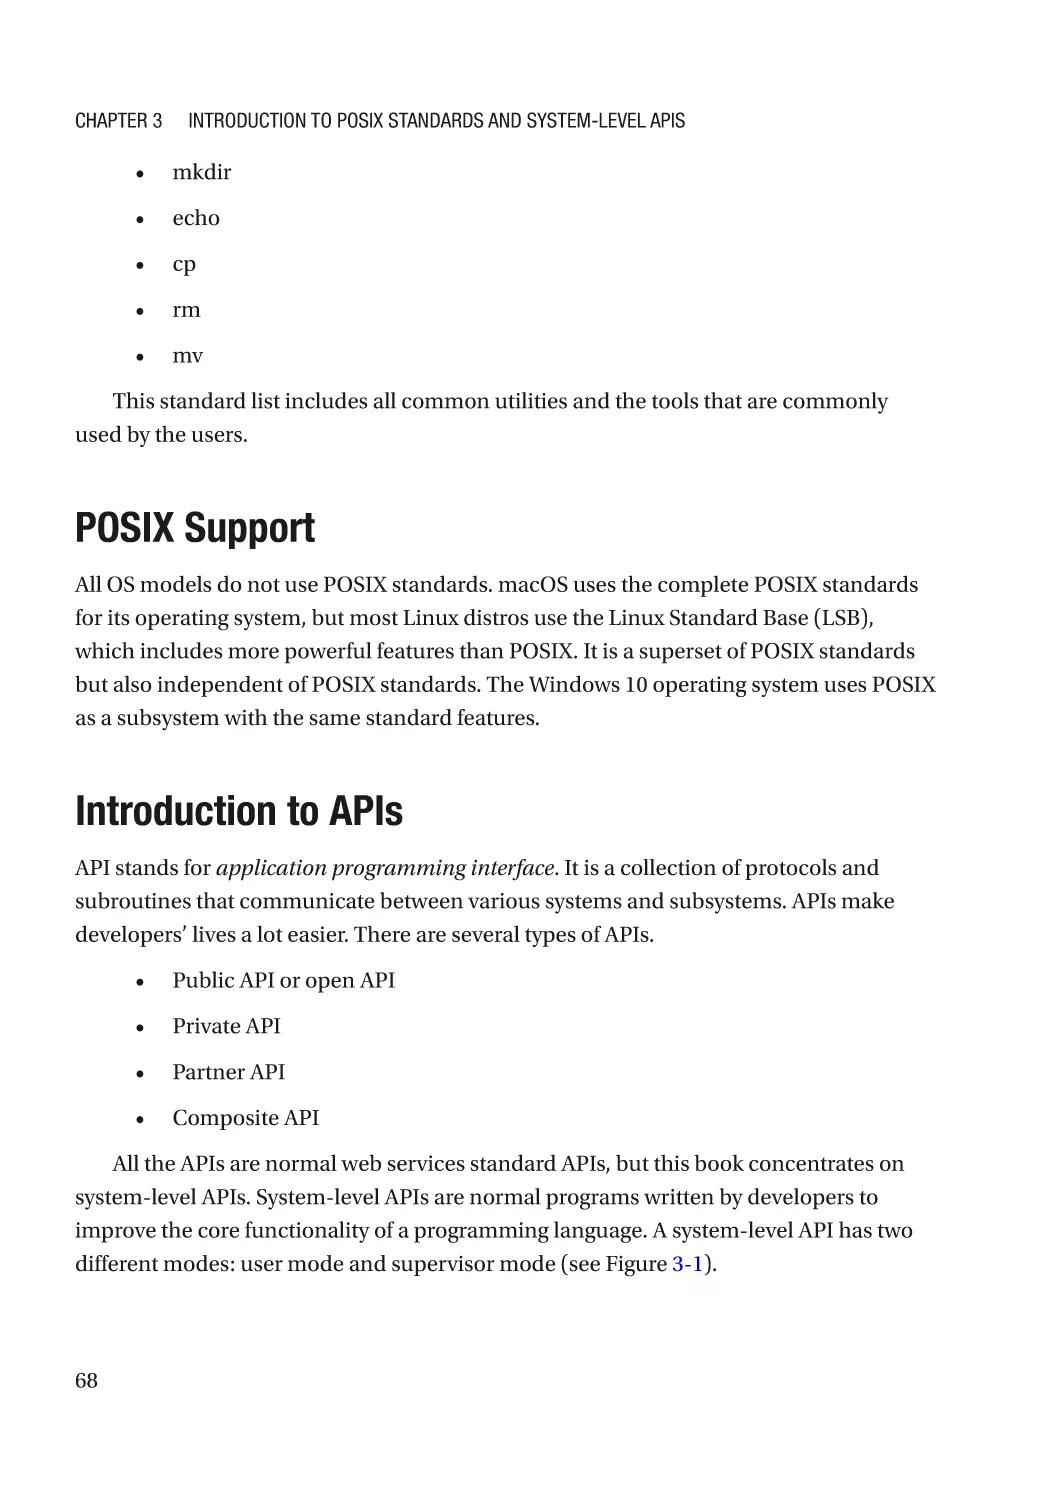 POSIX Support
Introduction to APIs